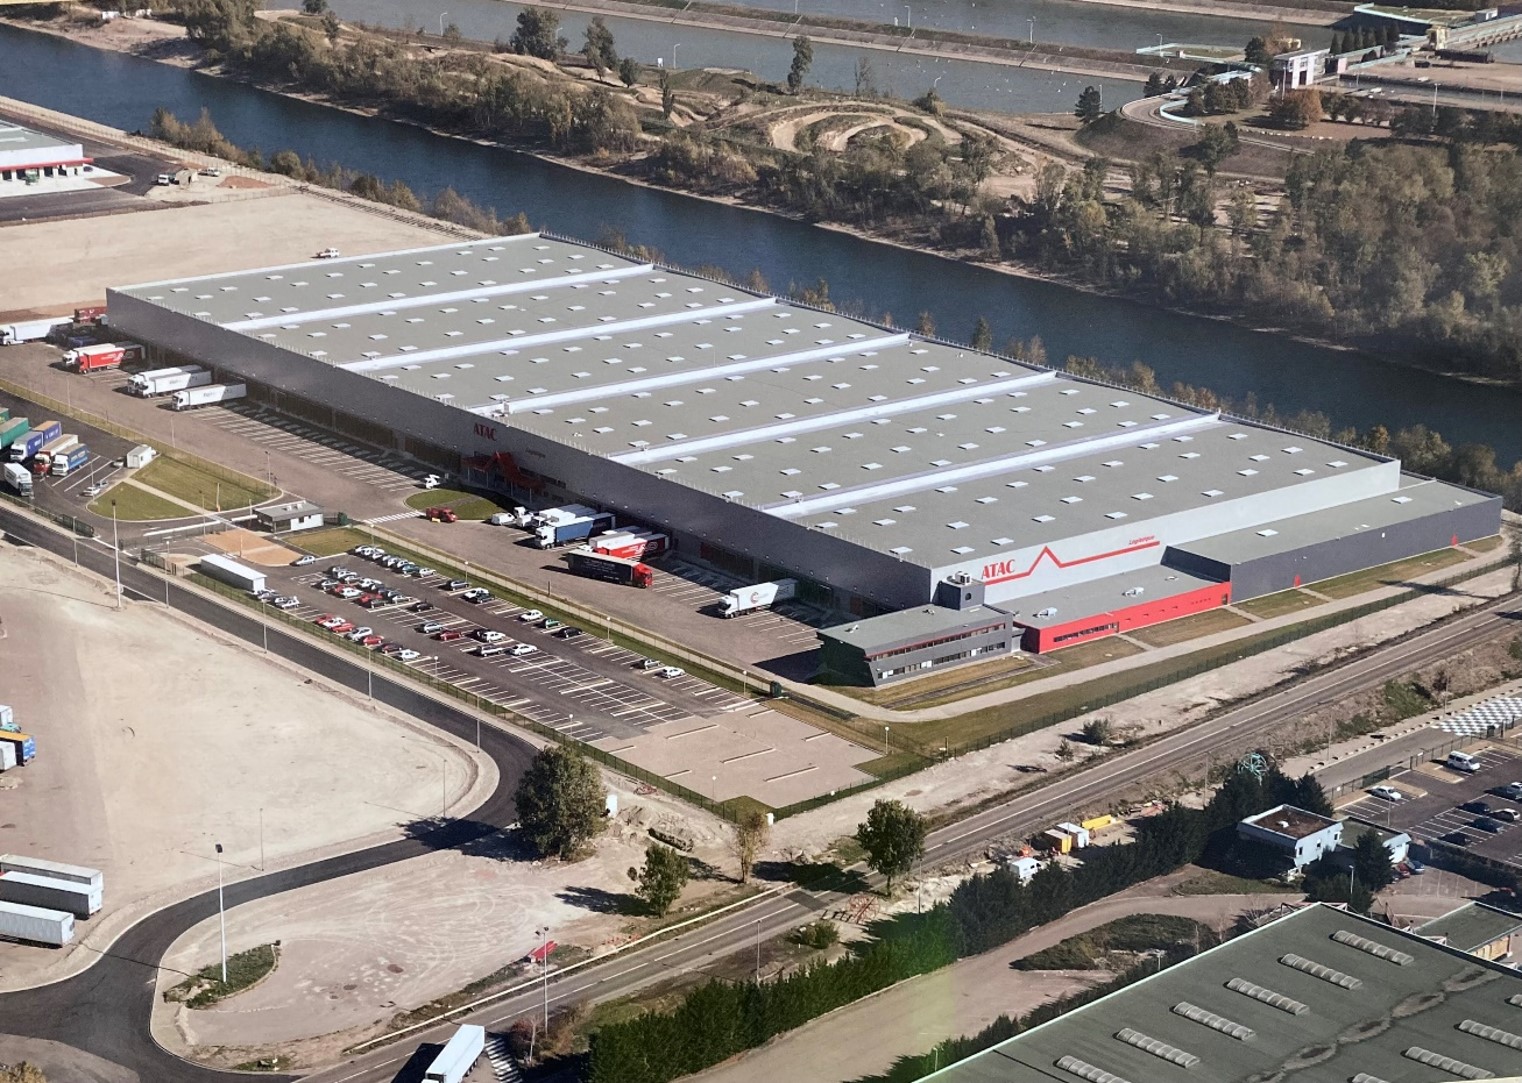 Scannell acquires 34,250 sq m multimodal logistics platform for sustainable redevelopment at the Port of Strasbourg